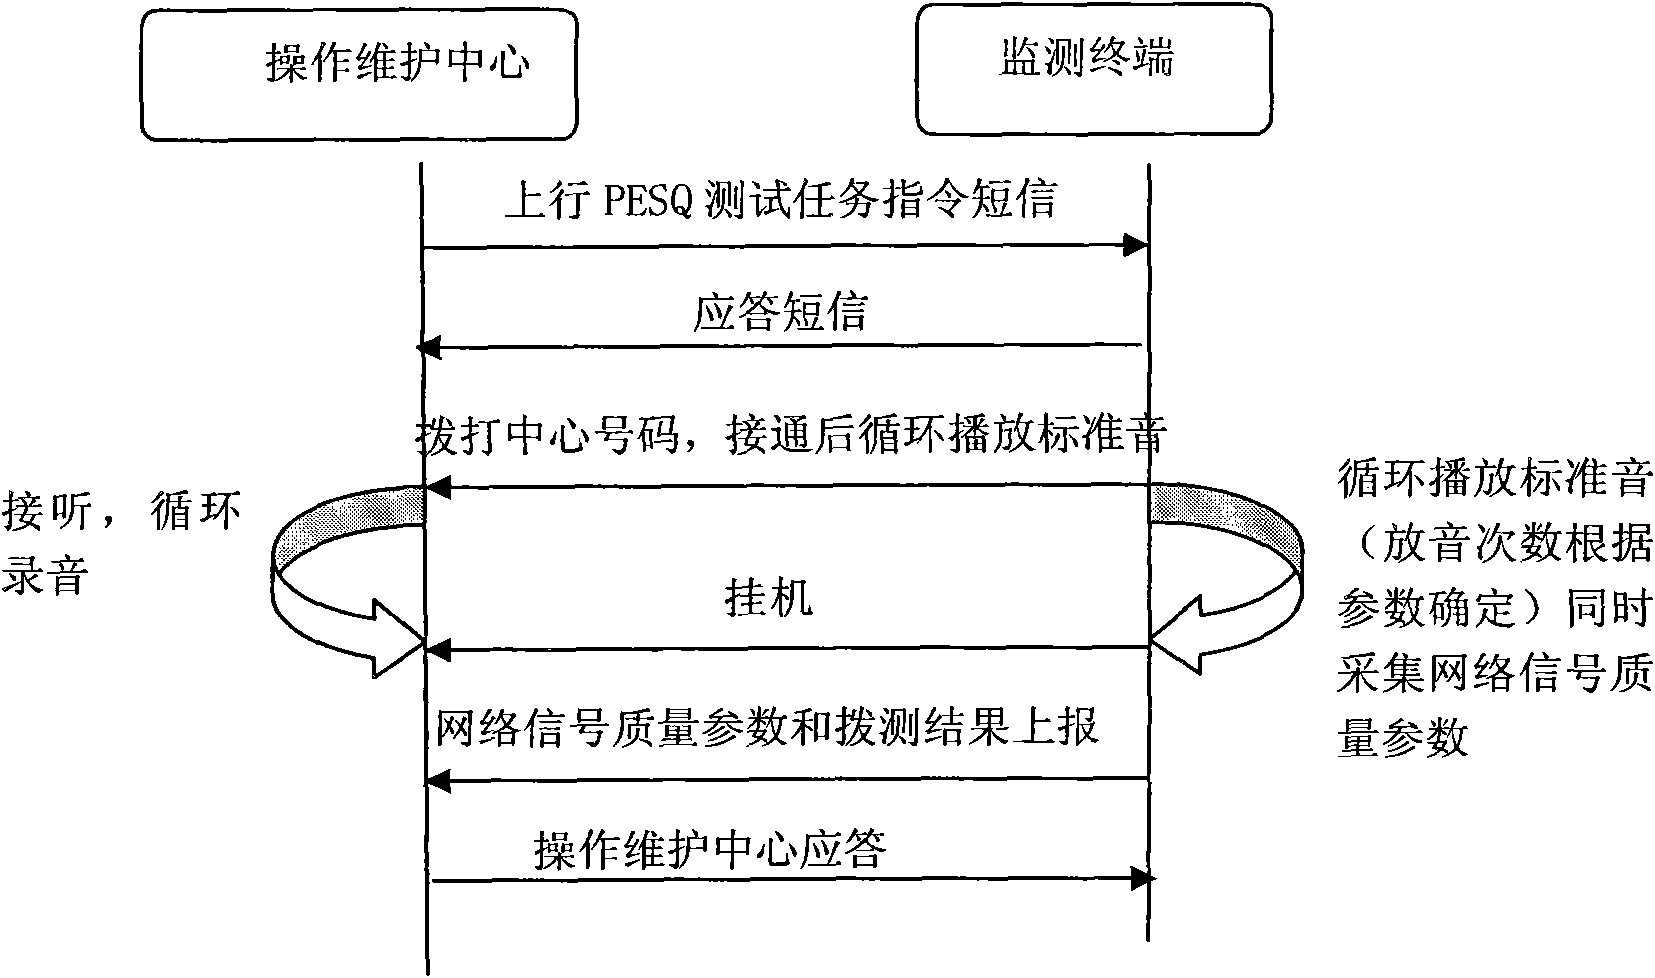 Automatic monitoring system and automatic monitoring method for WCDMA network